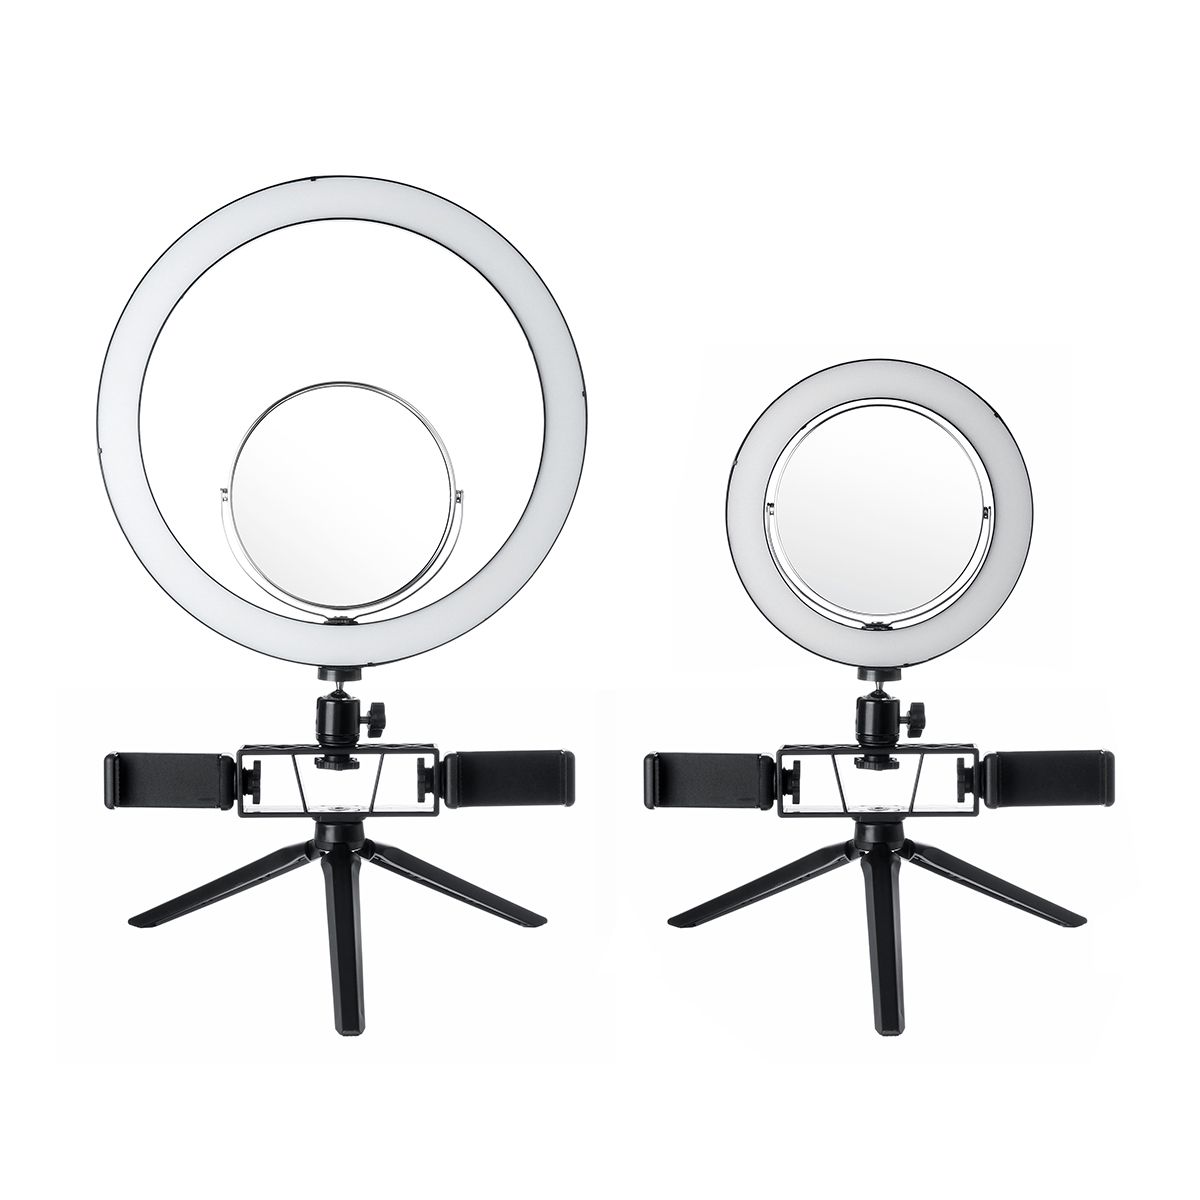 87126-Inch-LED-Dimmable-Video-Ring-Light-Tripod-Stand-with-Mirror-2-Phone-Clip-for-Youtube-Tik-Tok-M-1610612